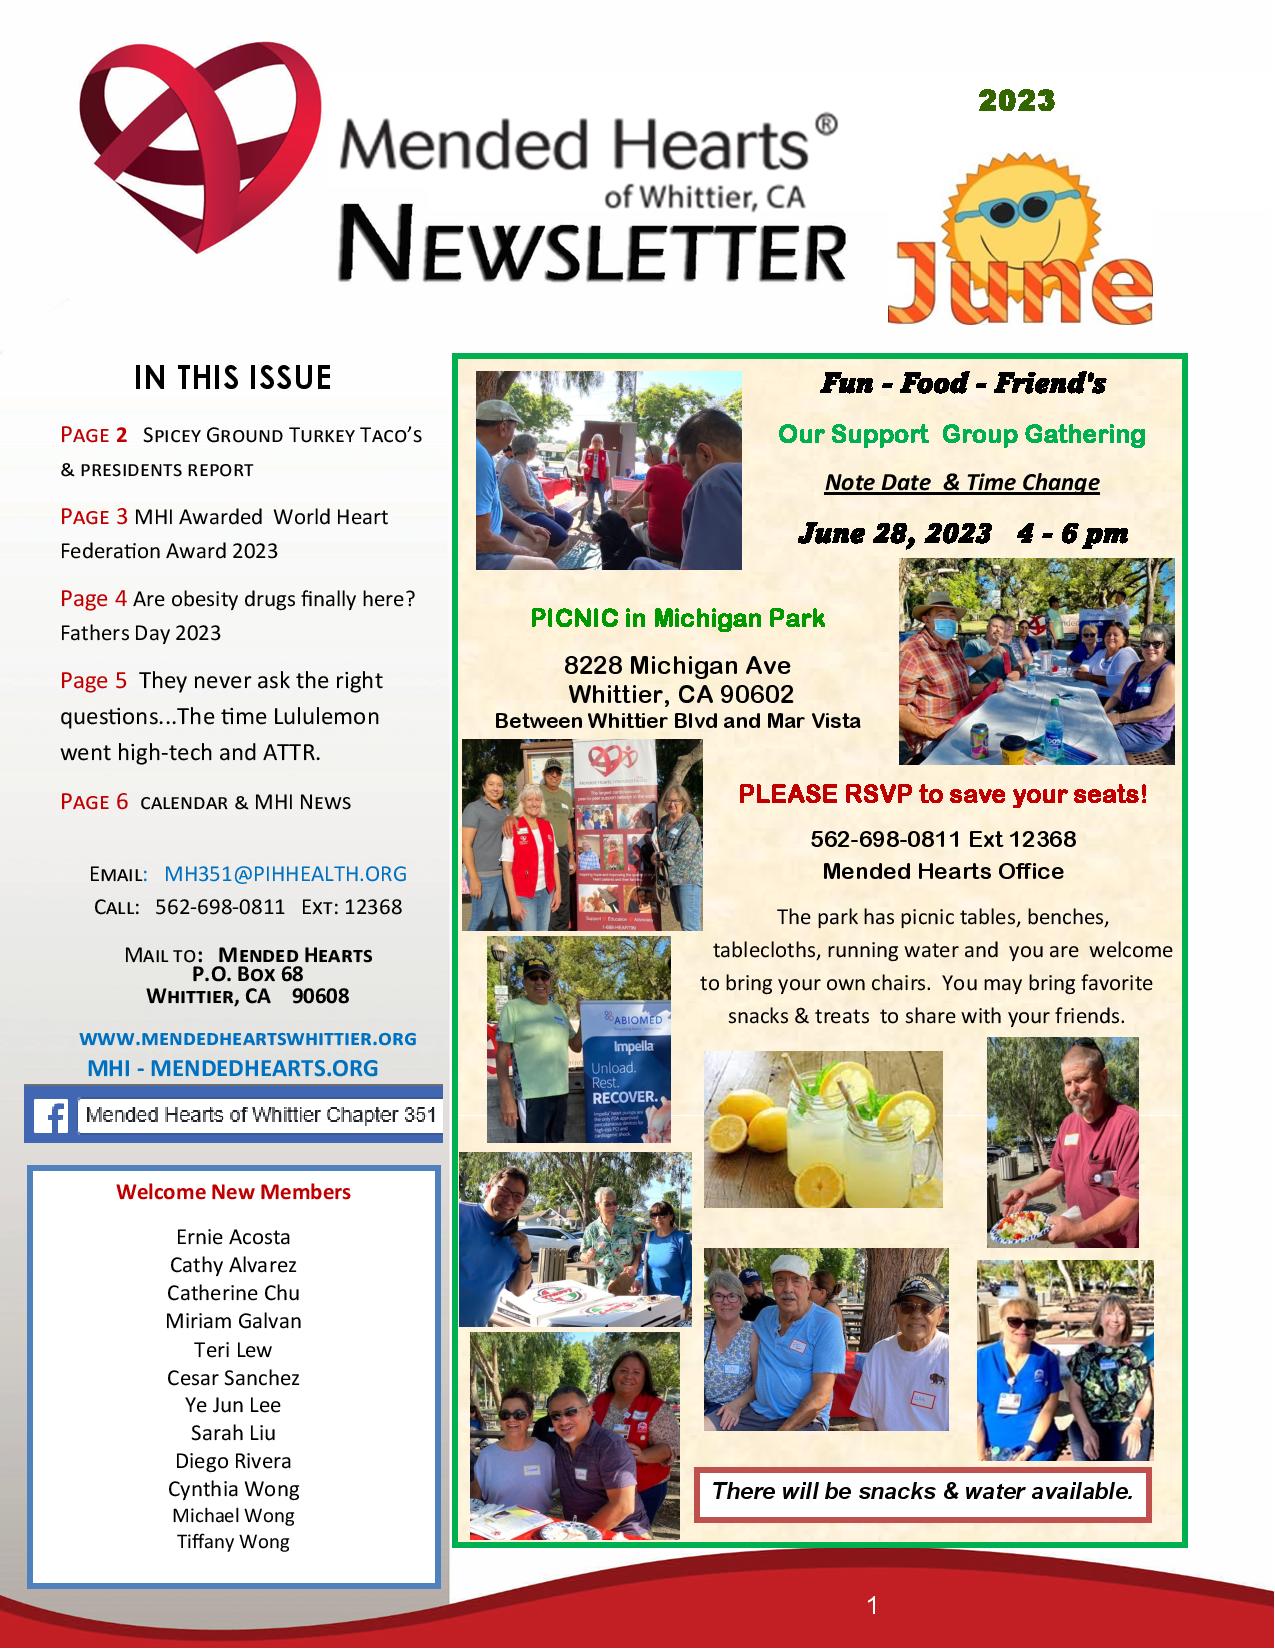 Mended Hearts Whittier May 2023 Newsletter